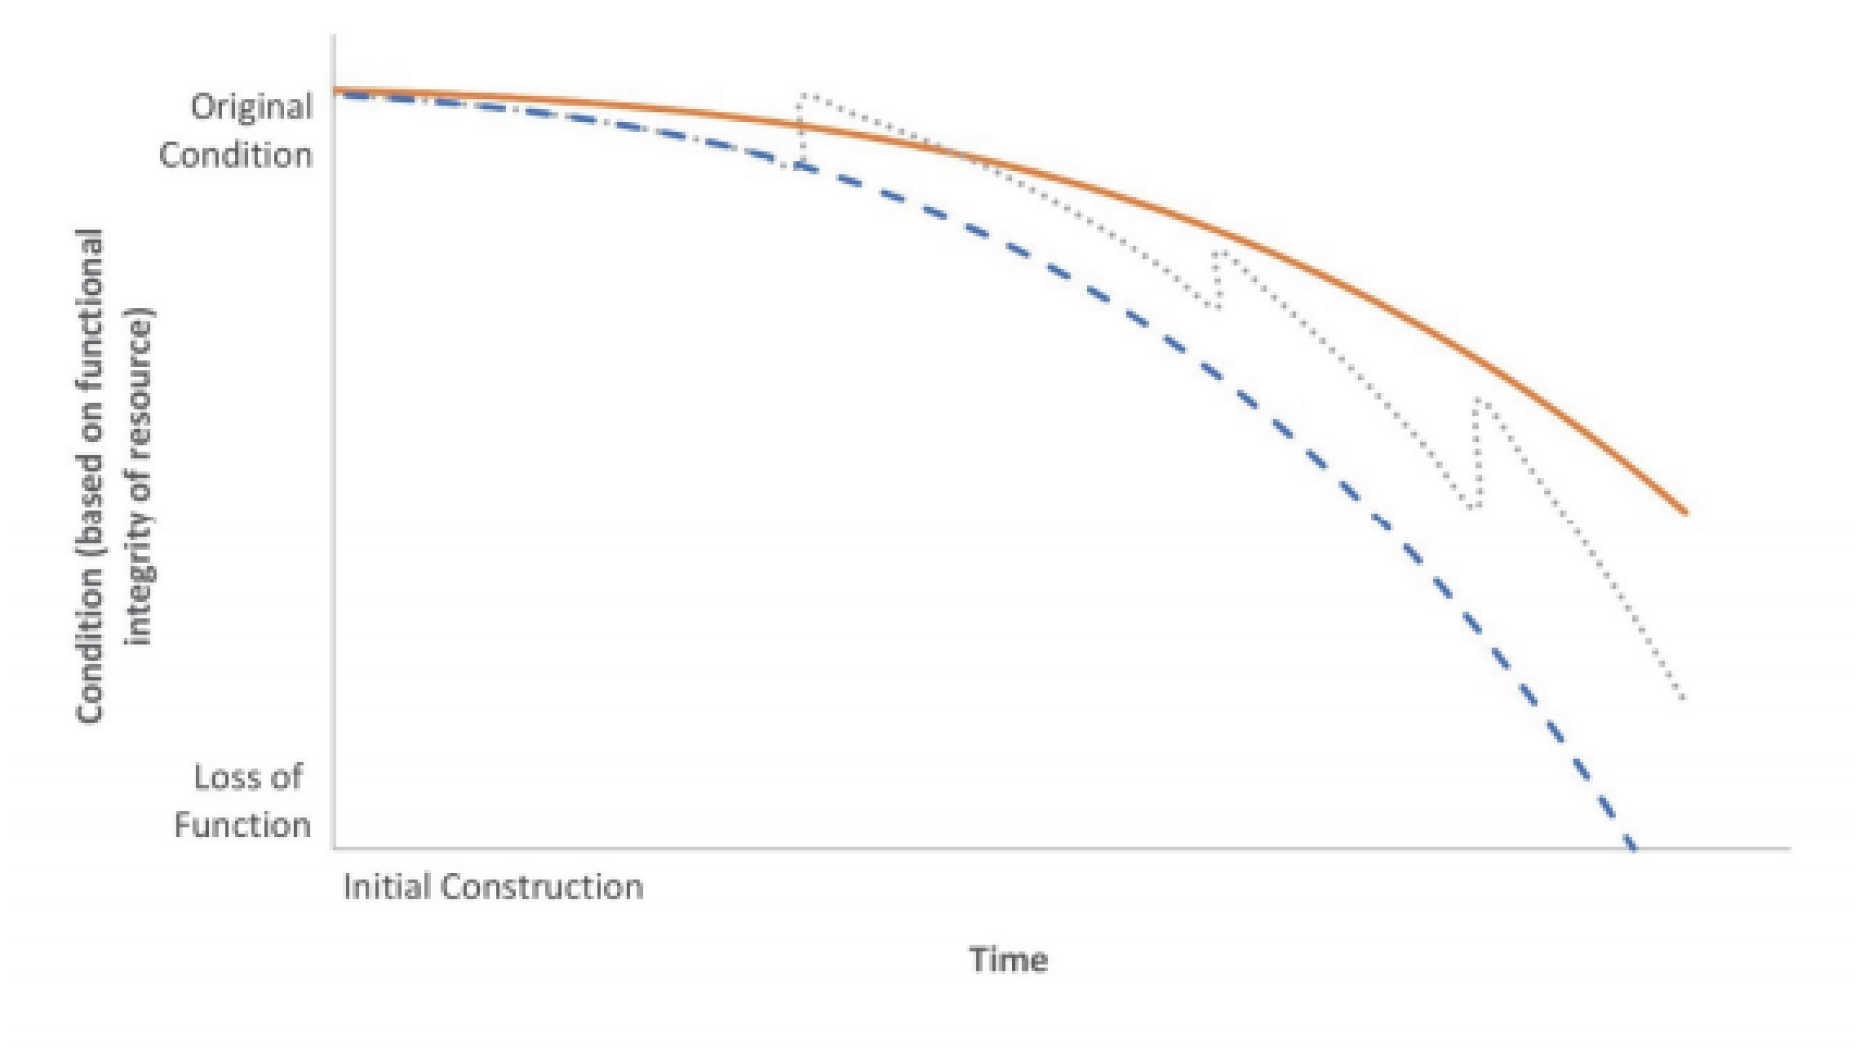 Graph showing slowest deterioration under preventive conservation, compared to curves for episodic campaigns and neglect